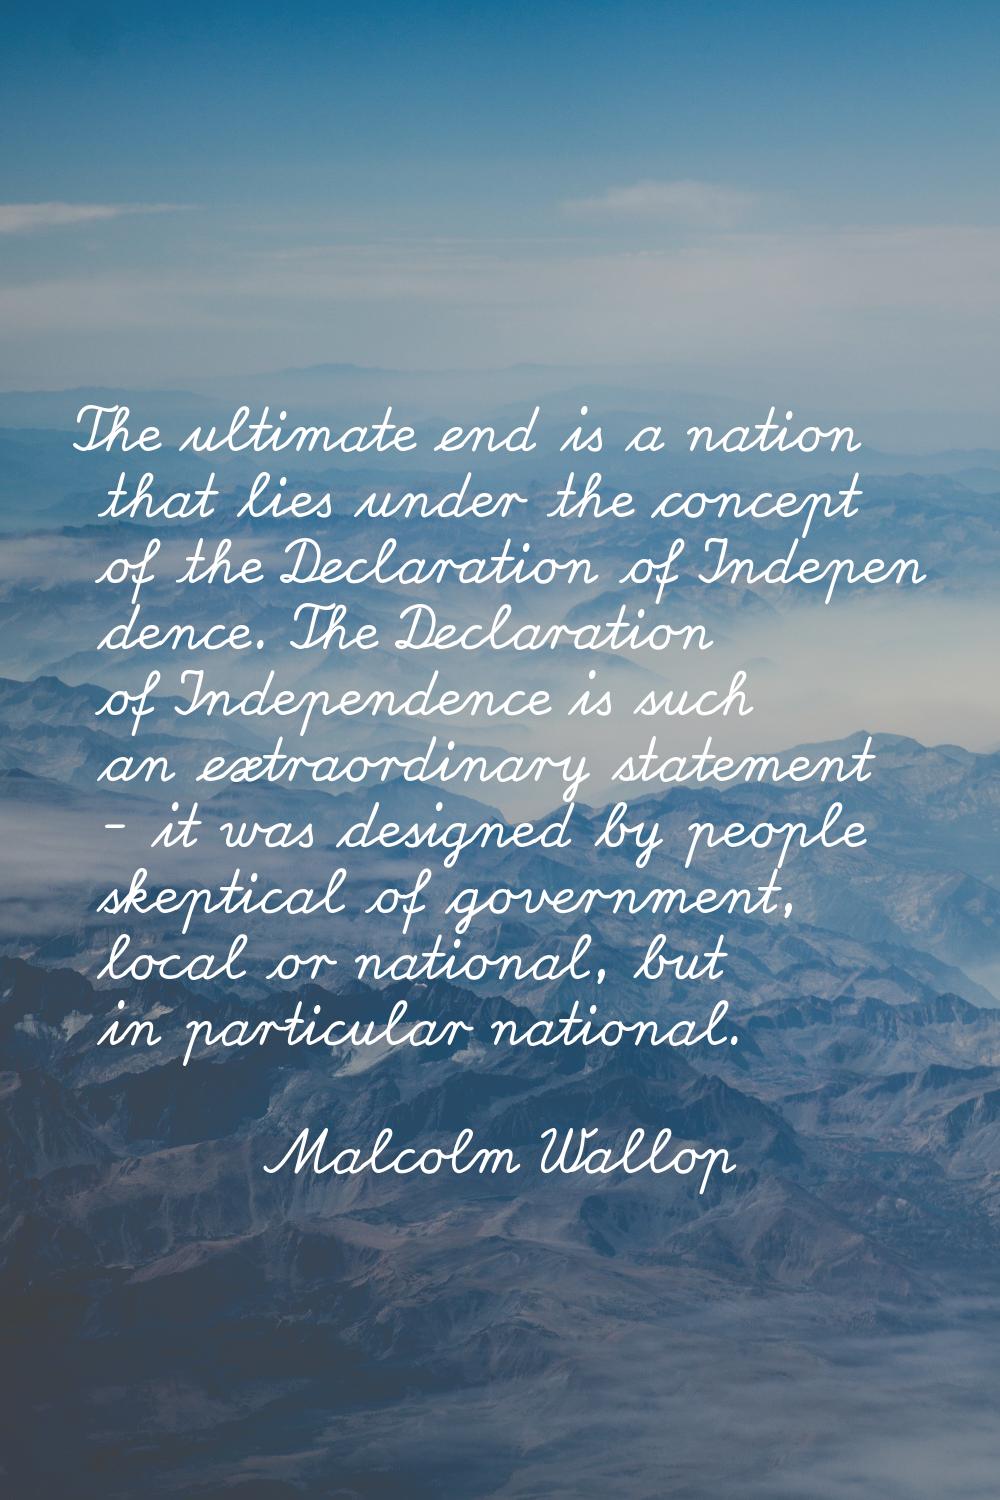 The ultimate end is a nation that lies under the concept of the Declaration of Indepen dence. The D